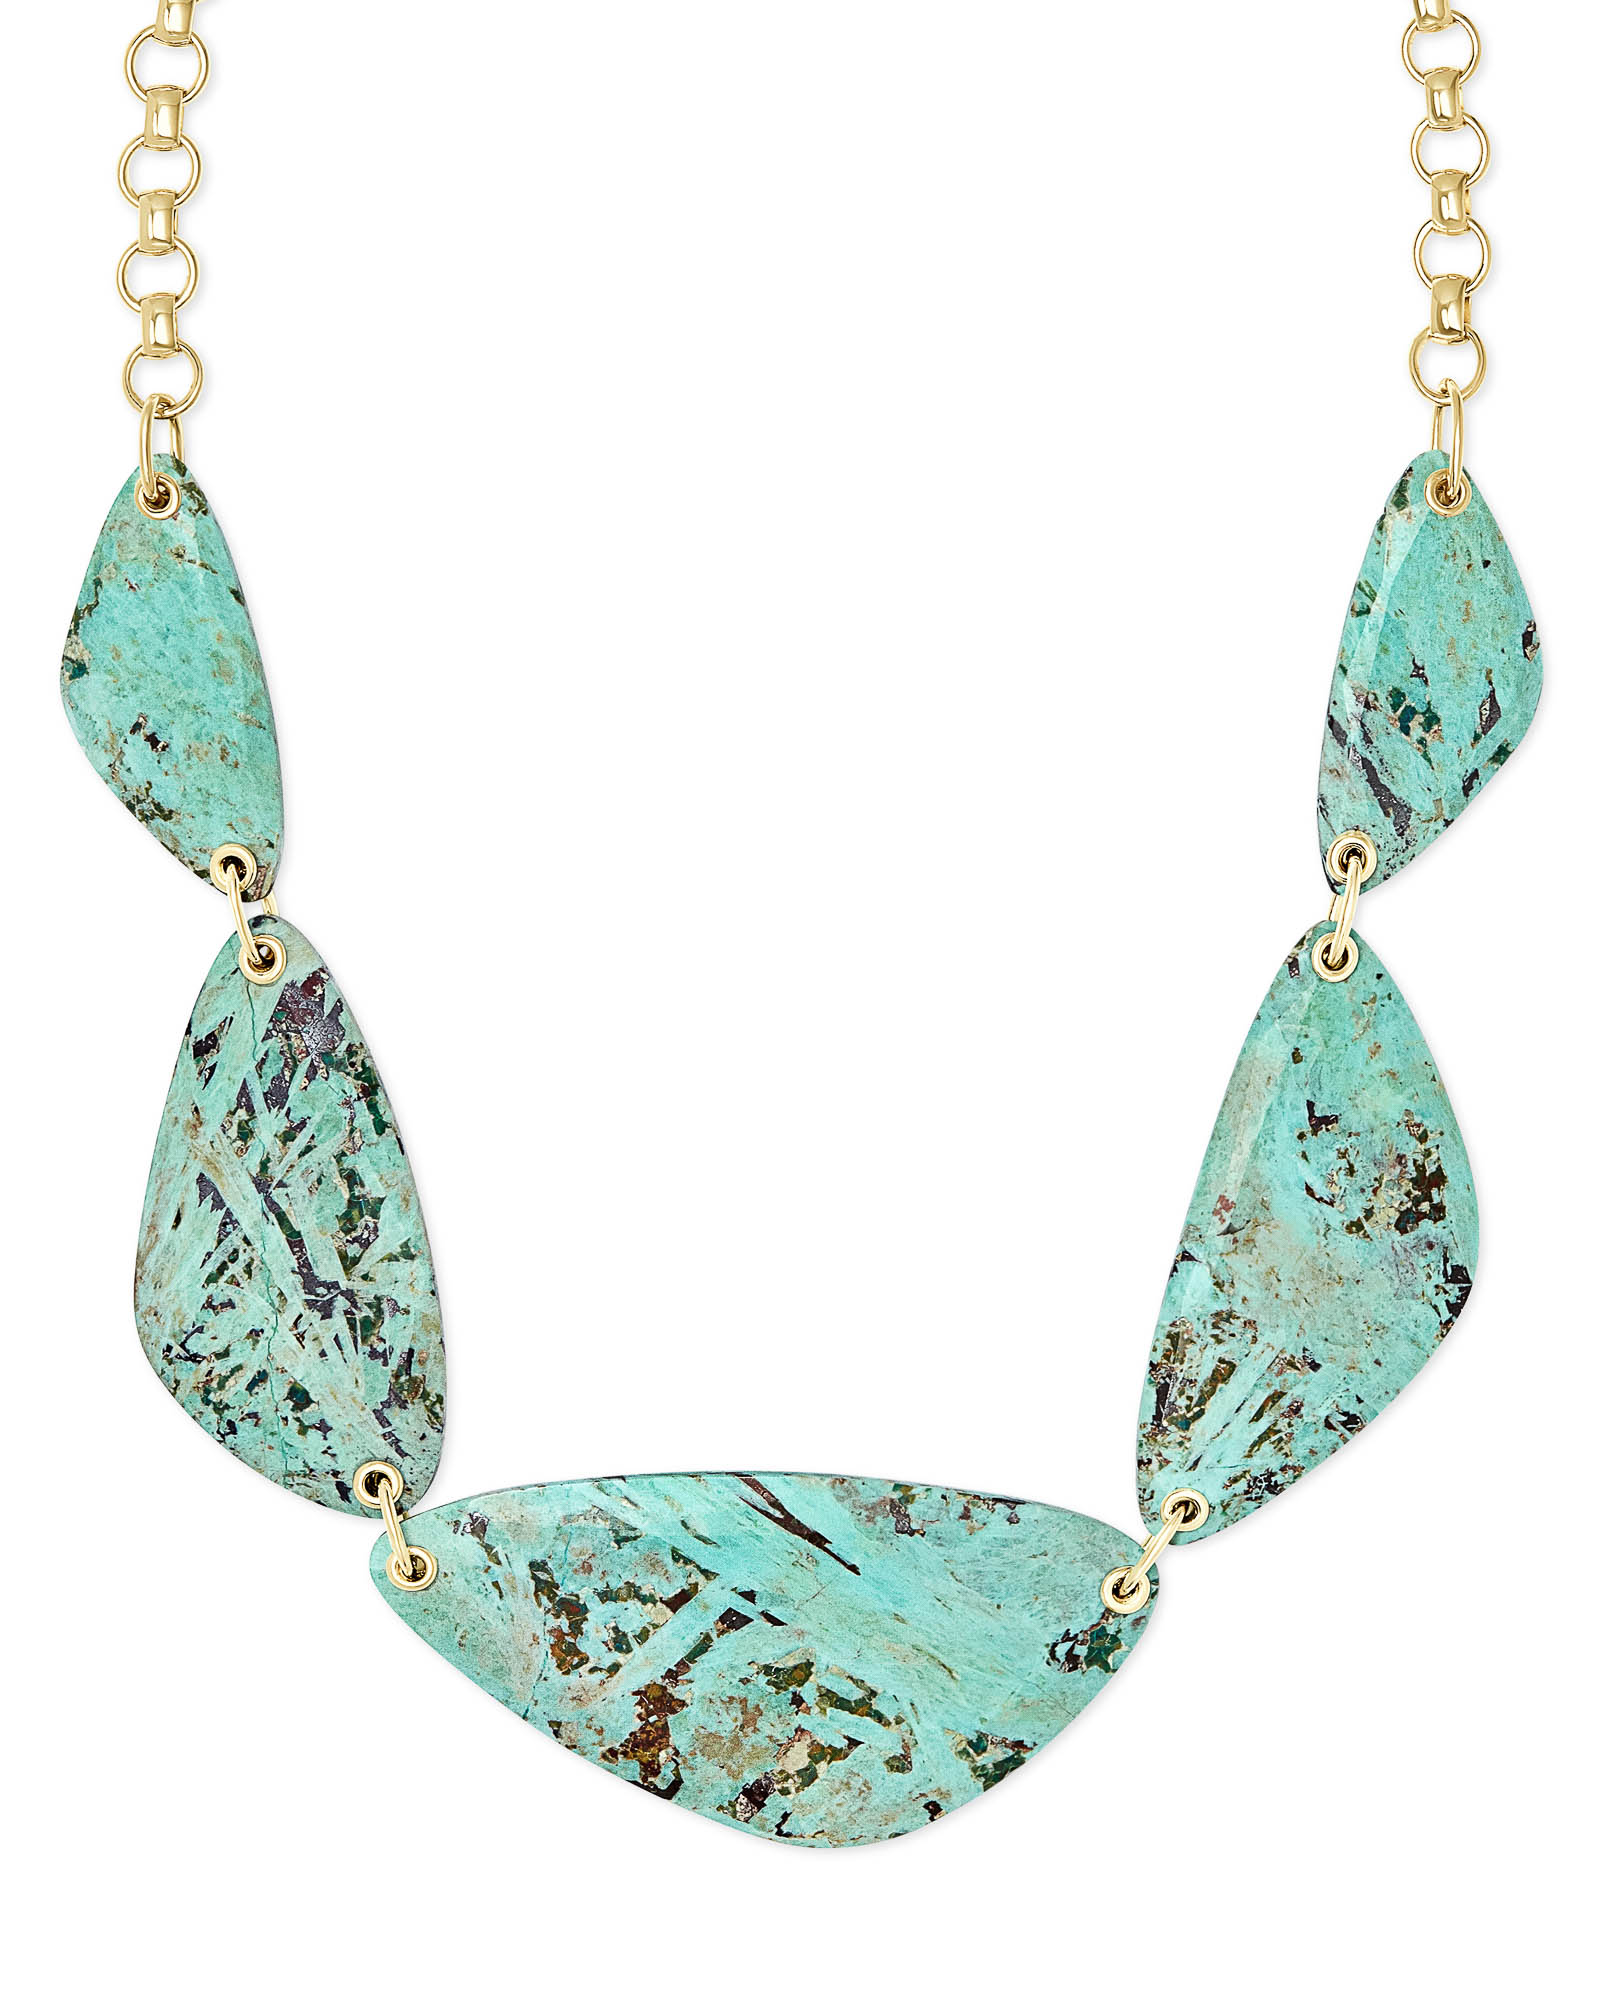 This pretty necklace has turquoise long pieces for an abstract bib necklace.